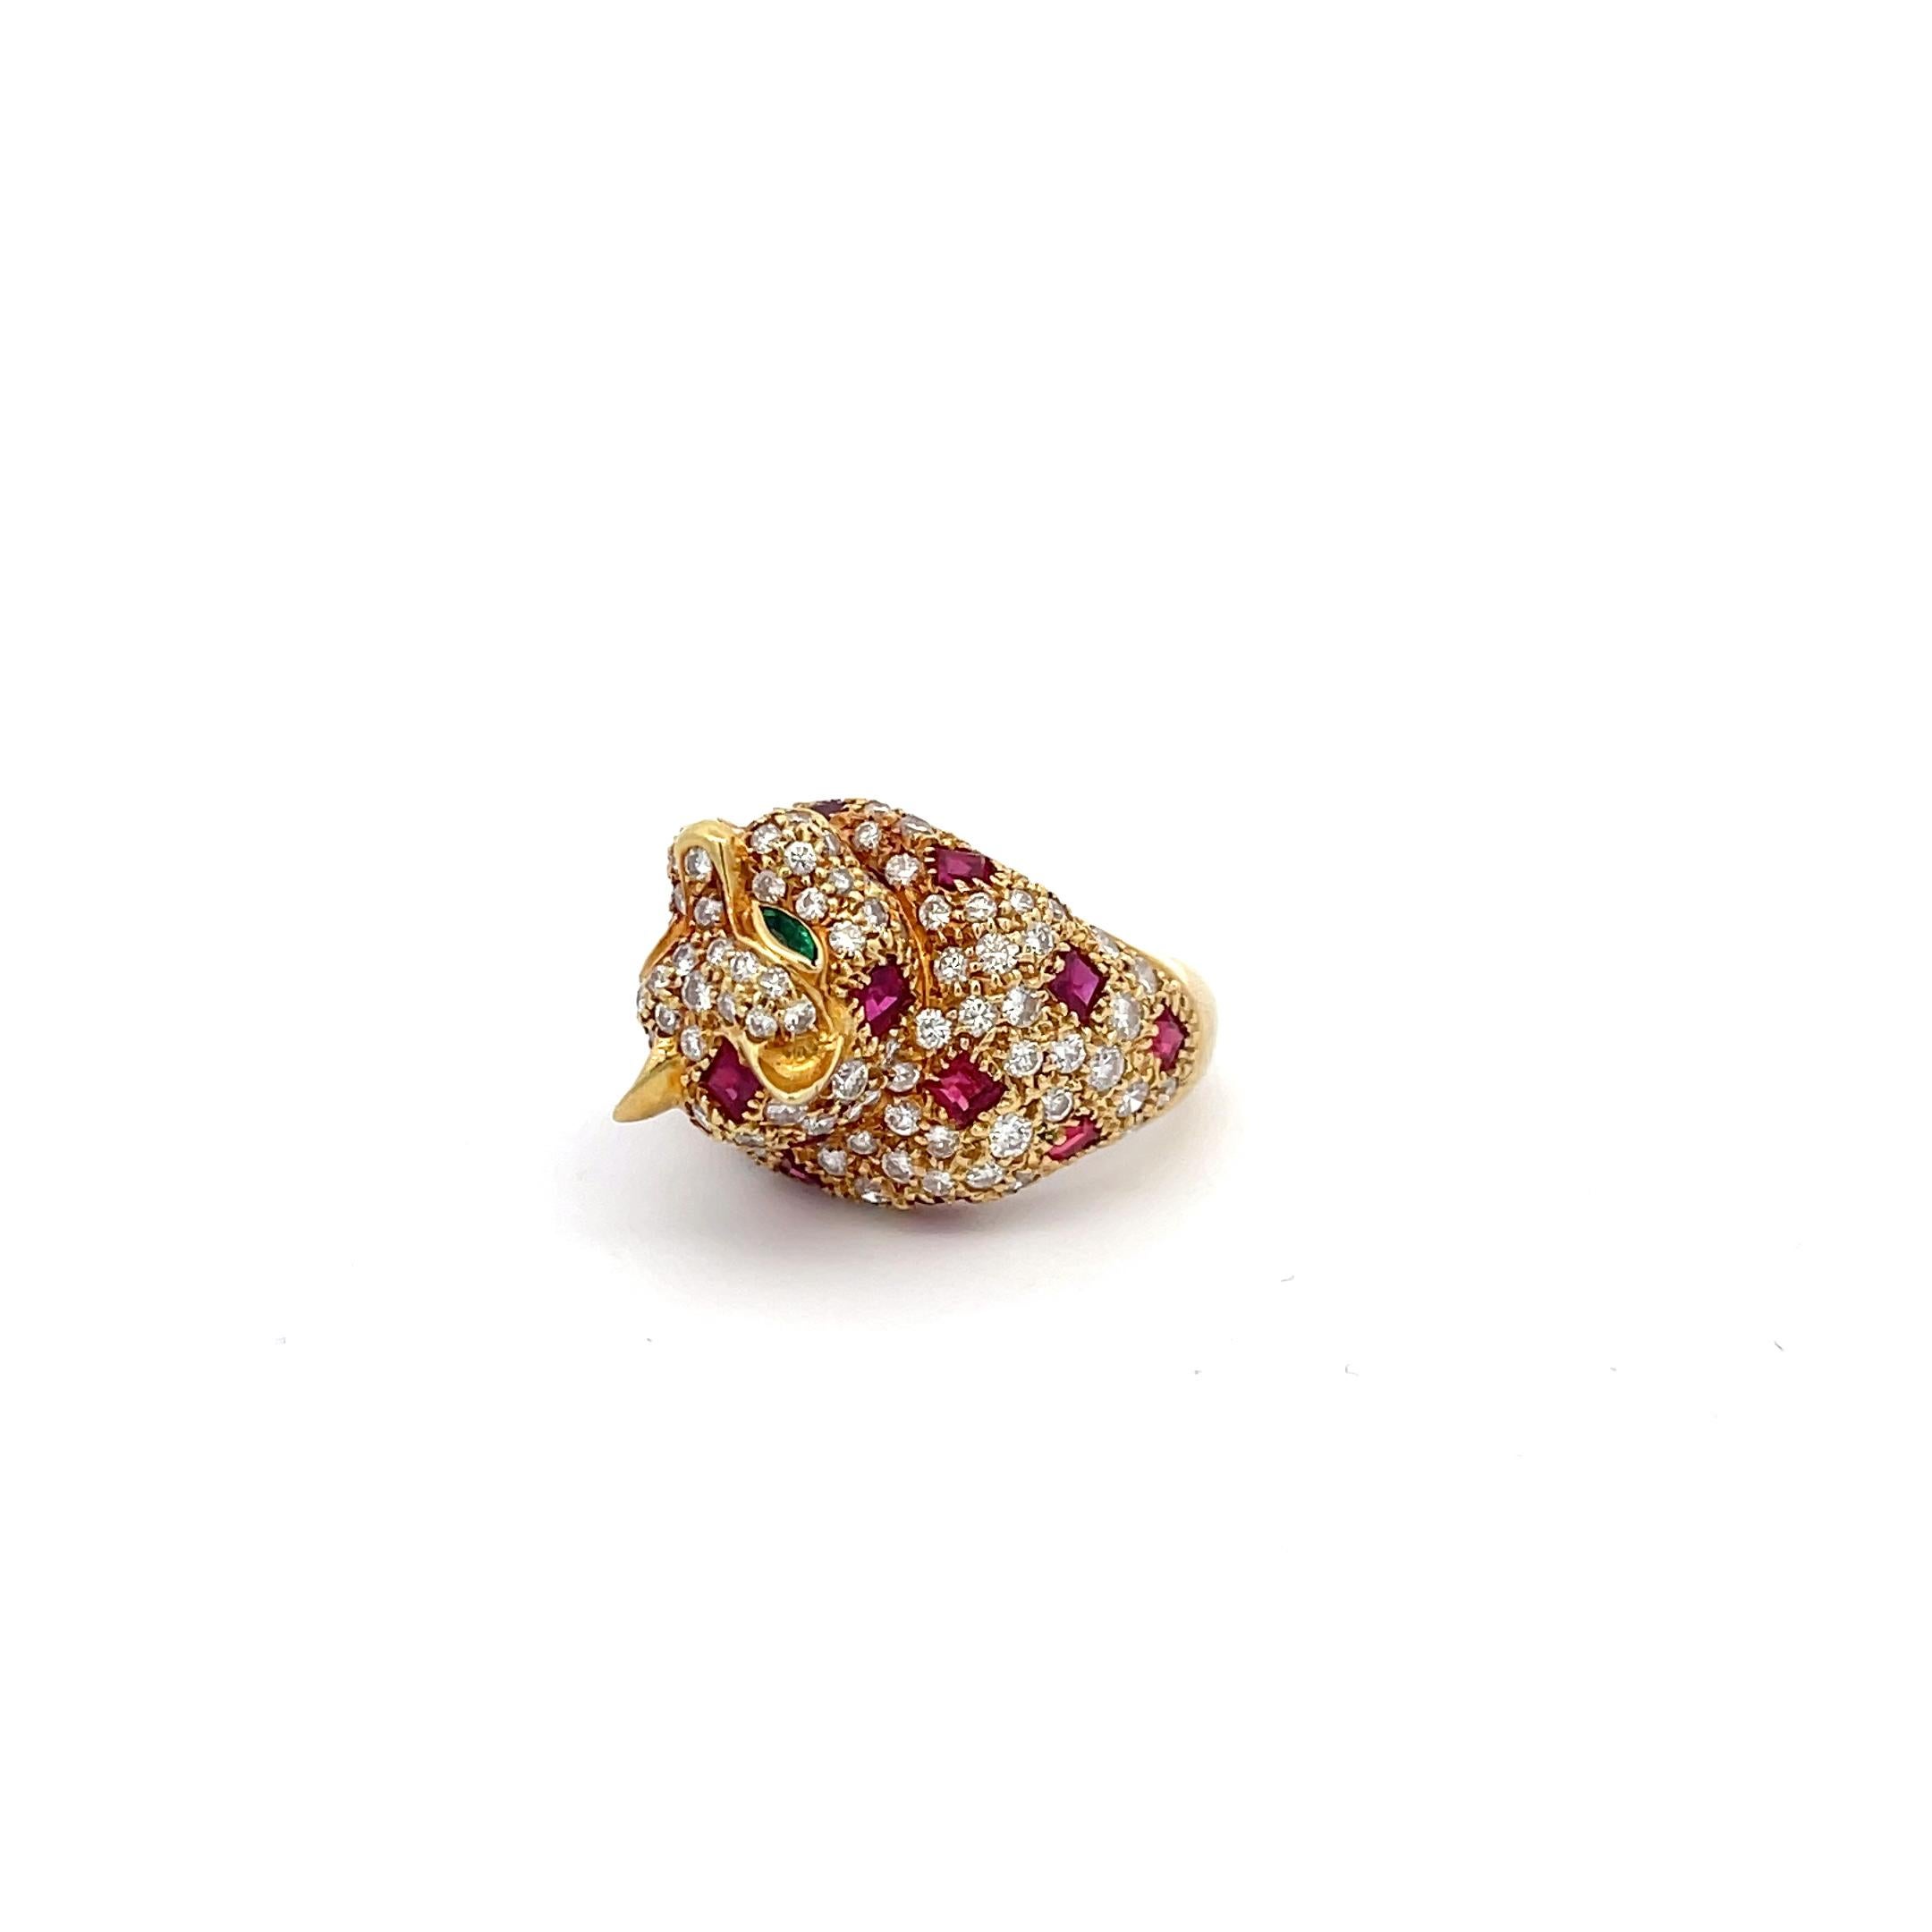 Estate Craig Drake Diamond and Ruby Panther Ring in 18K Yellow Gold. The ring features brilliant round cut diamonds, square cut rubies, and marquise cut emeralds. Ring size 7. 
11.4 Grams